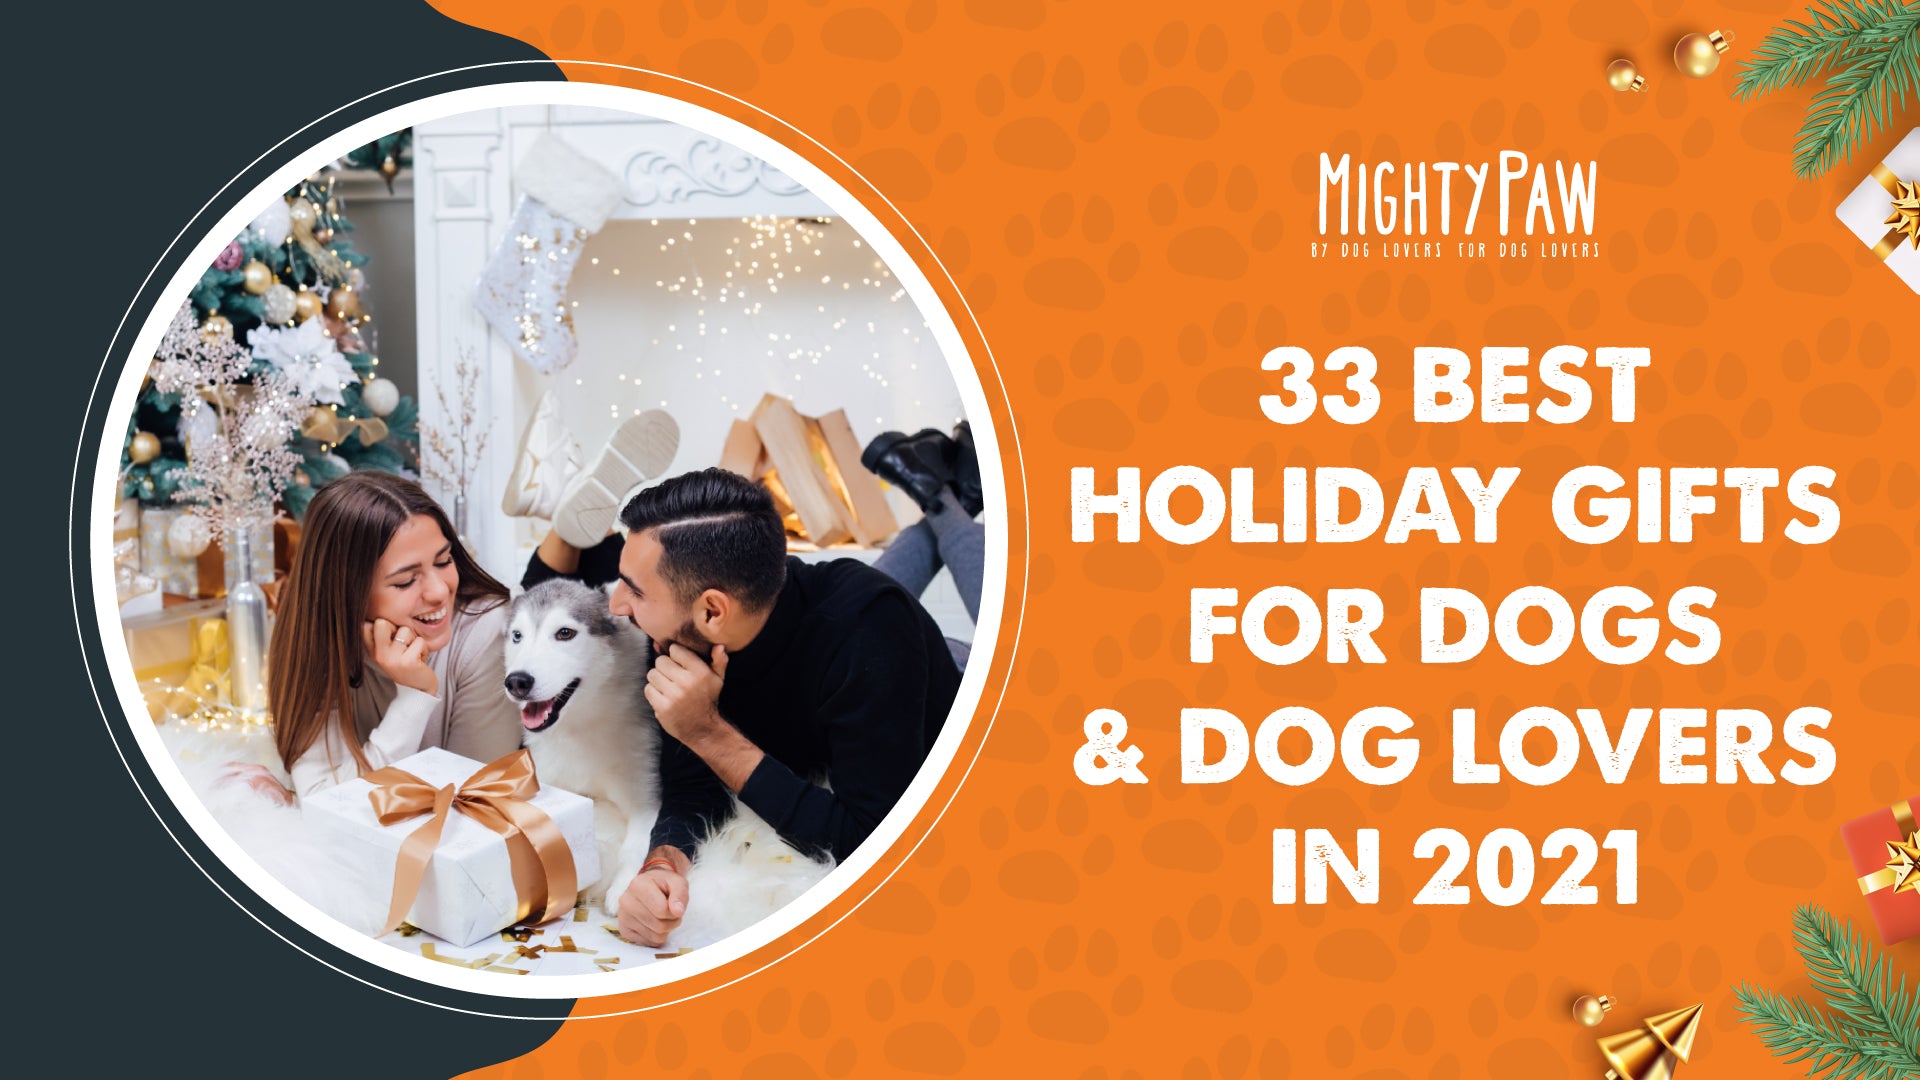 33 best holiday gifts for dogs and dog lovers in 2021